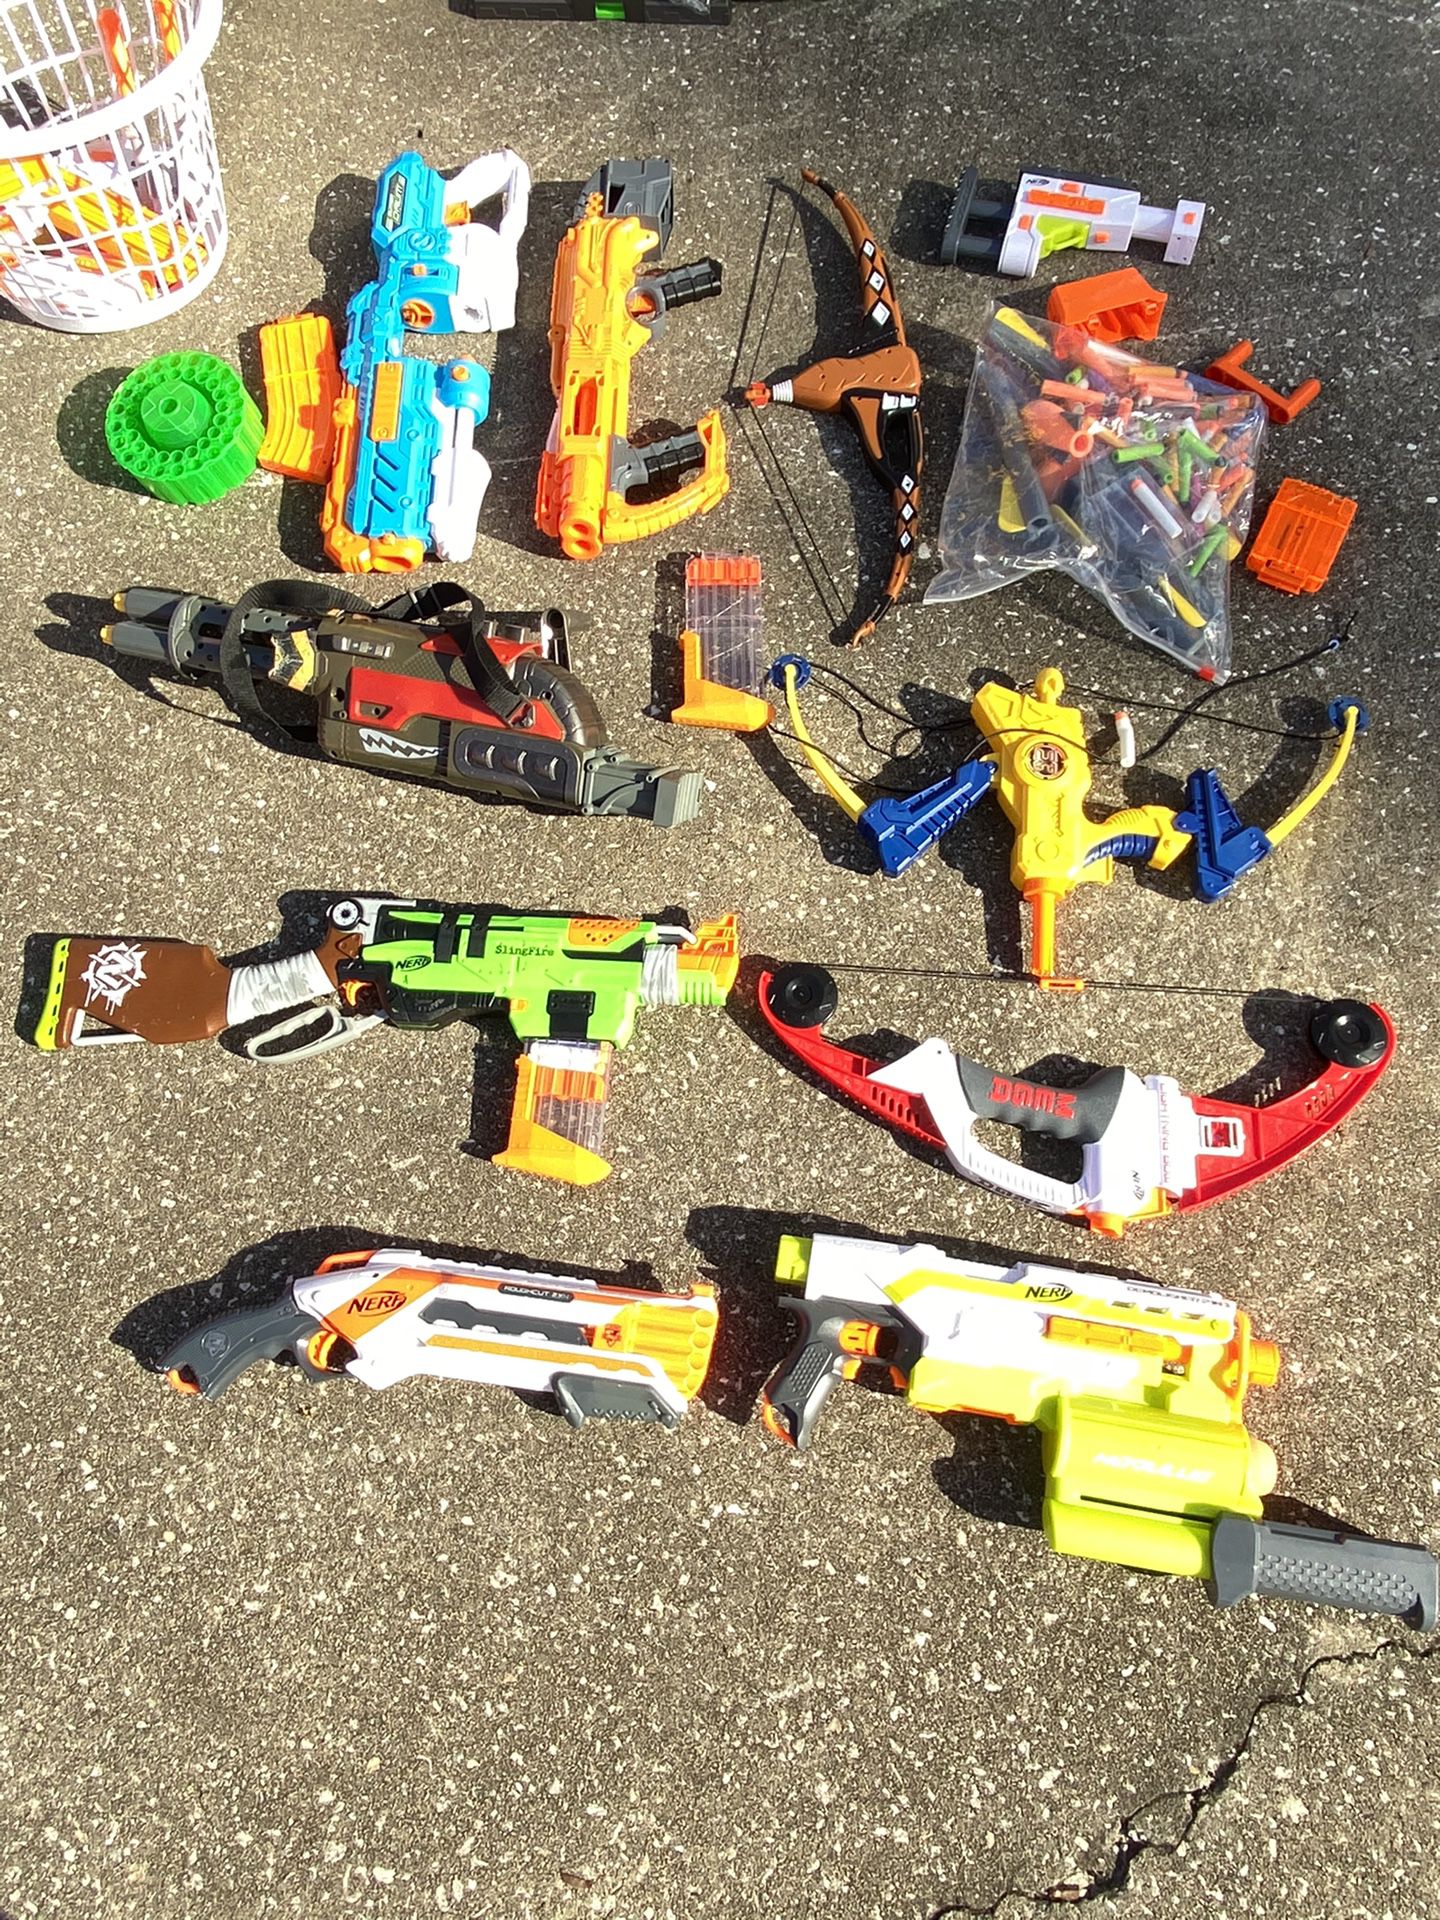 All for $80